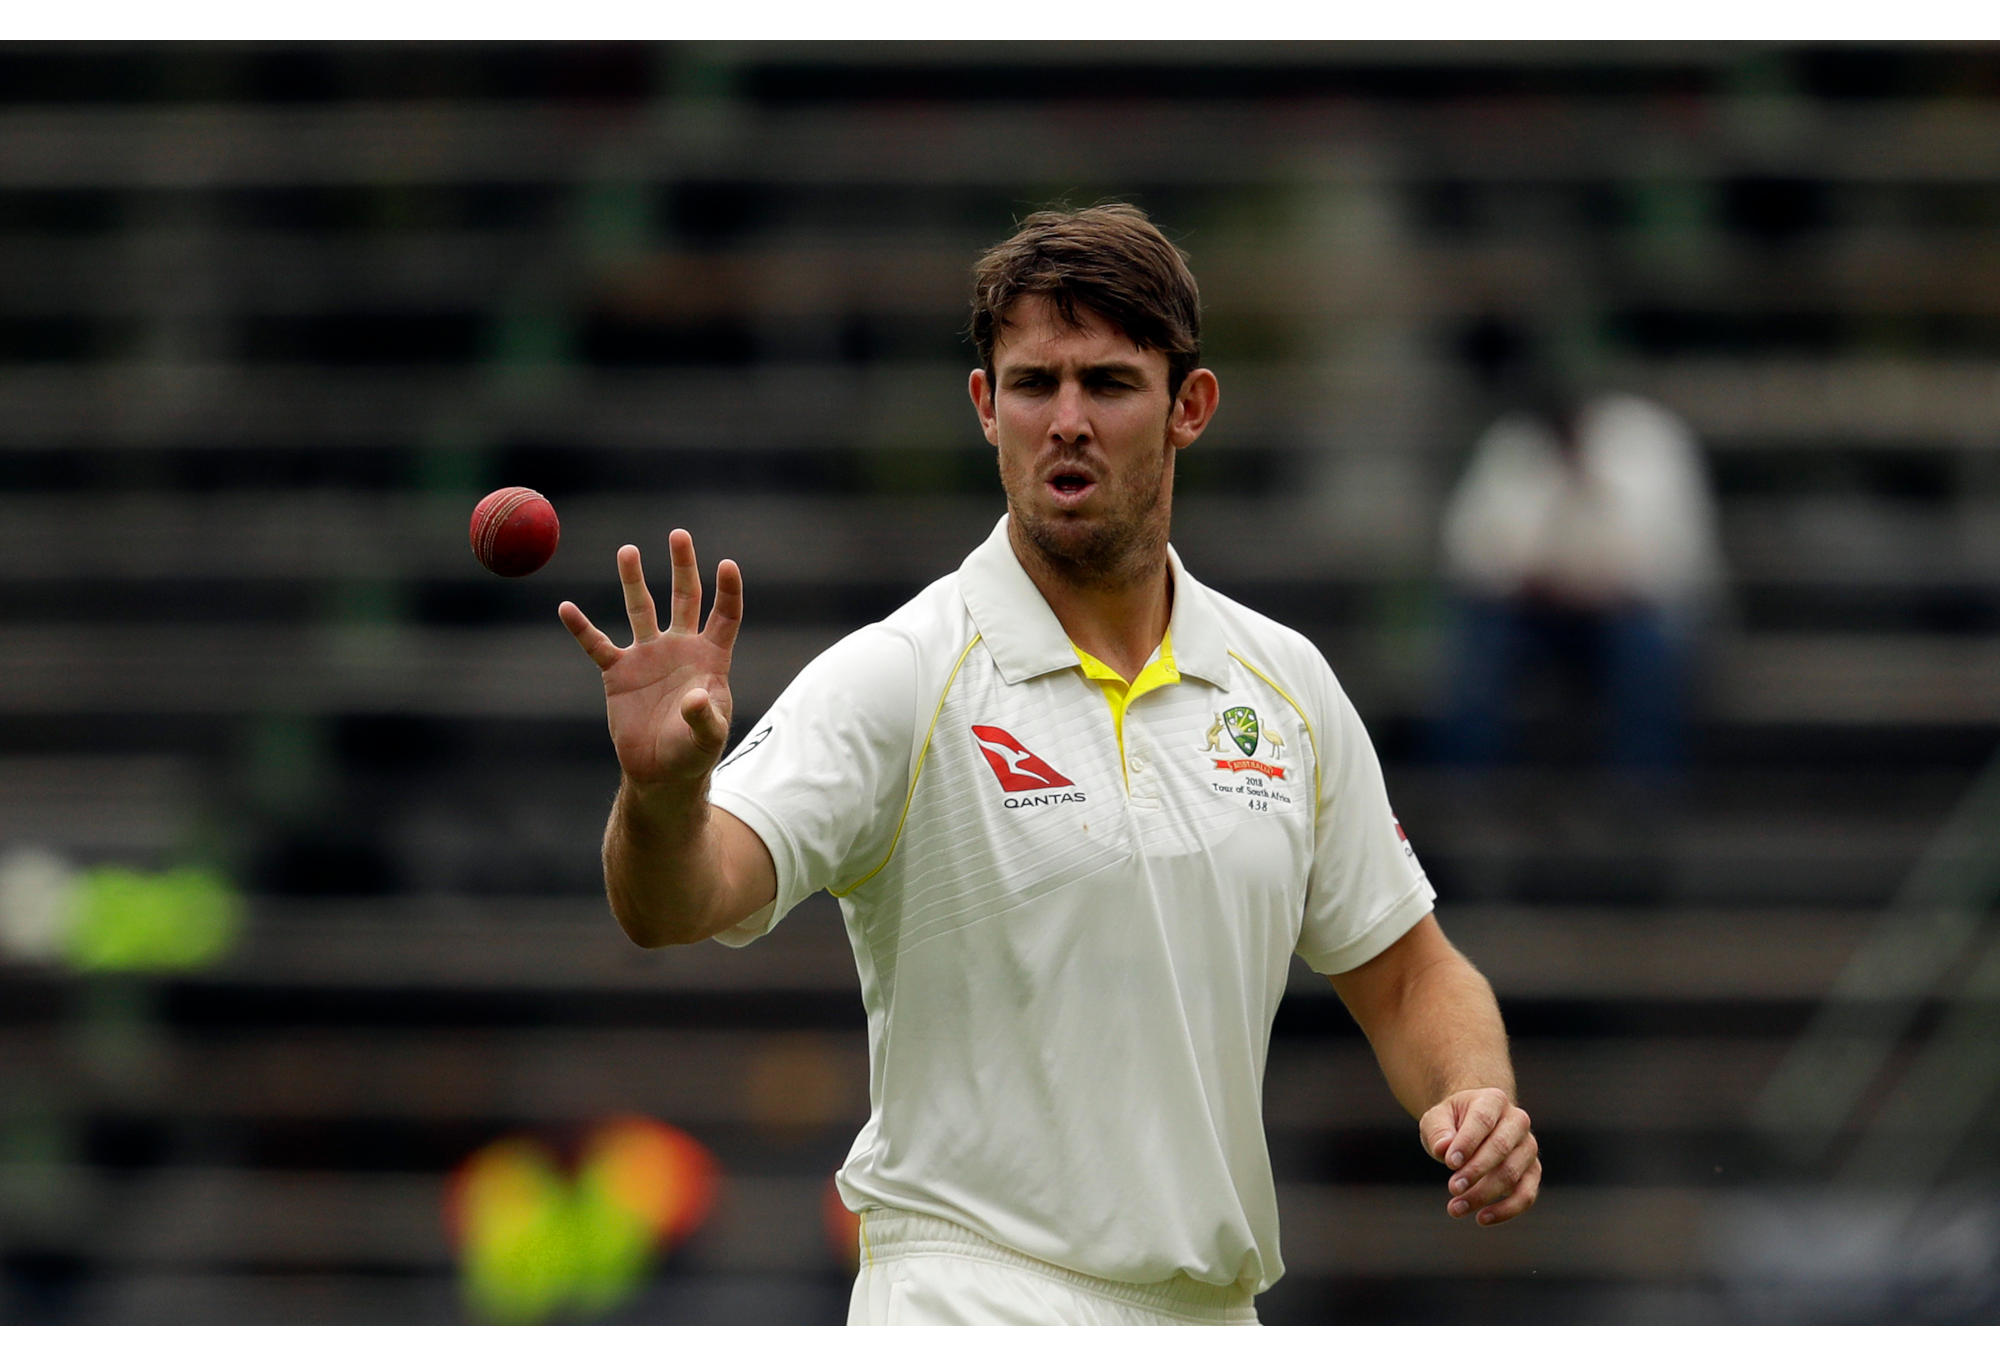 Australia's bowler Mitchell Marsh receives the ball as he prepares to bowl against South Africa.